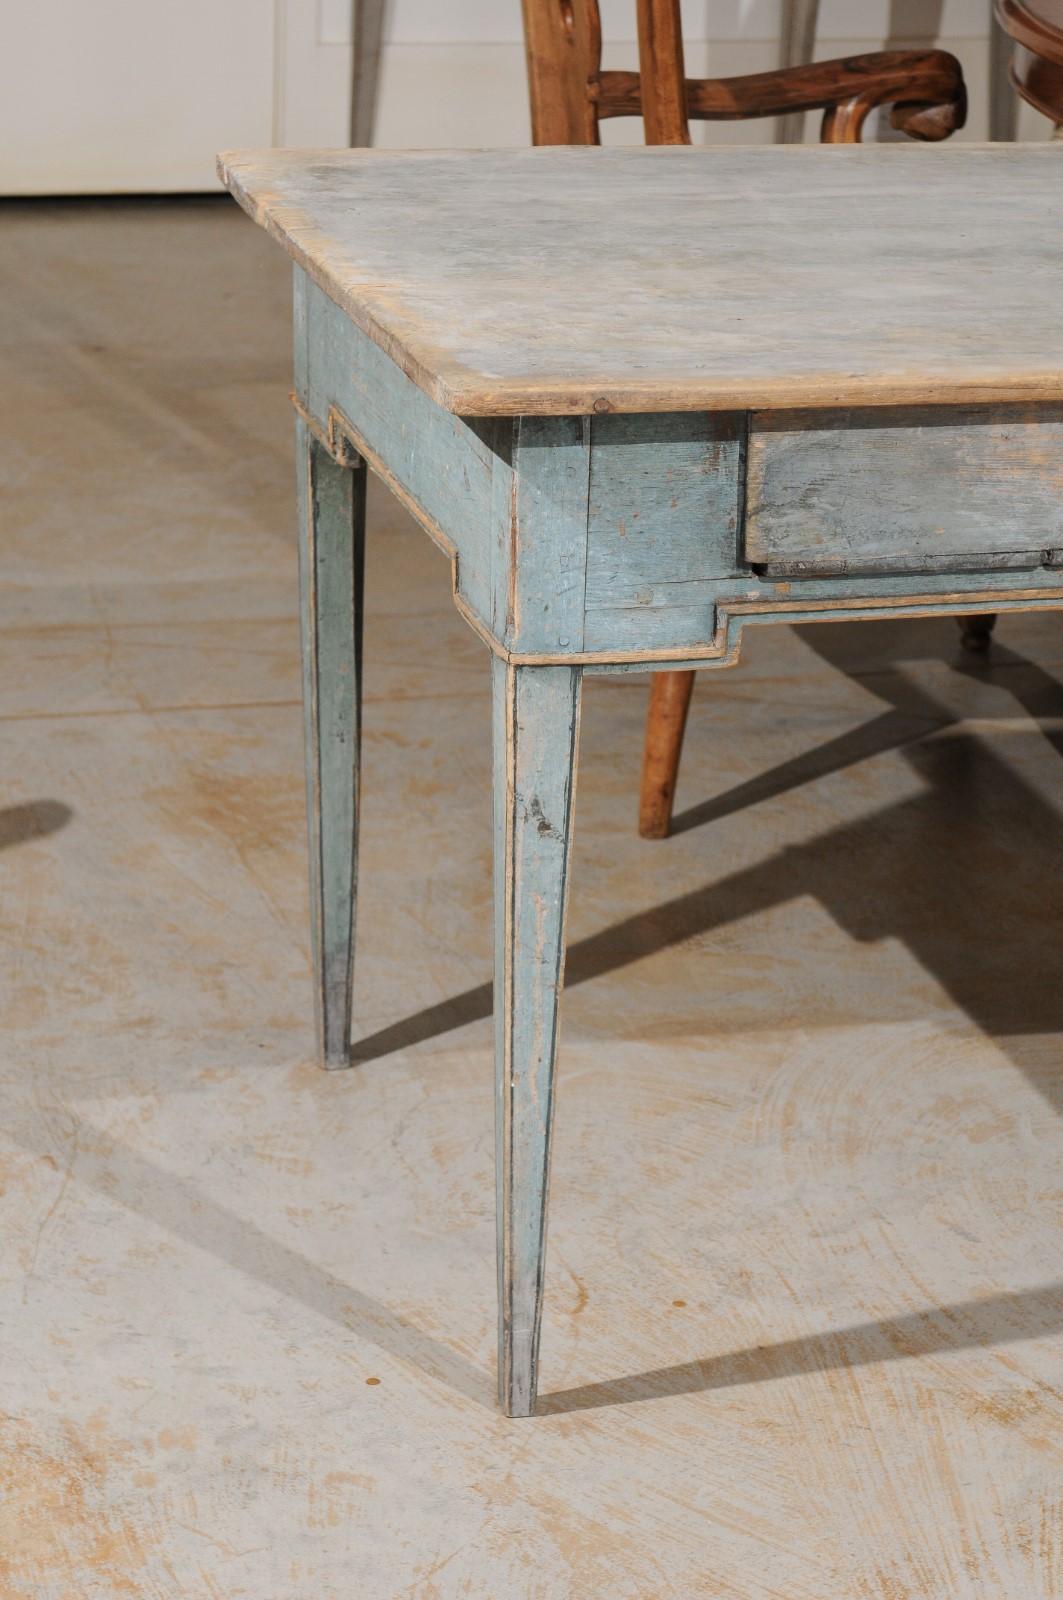 French Provincial Swedish Provincial 1800s Painted Side Table with Single Drawer and Tapered Legs